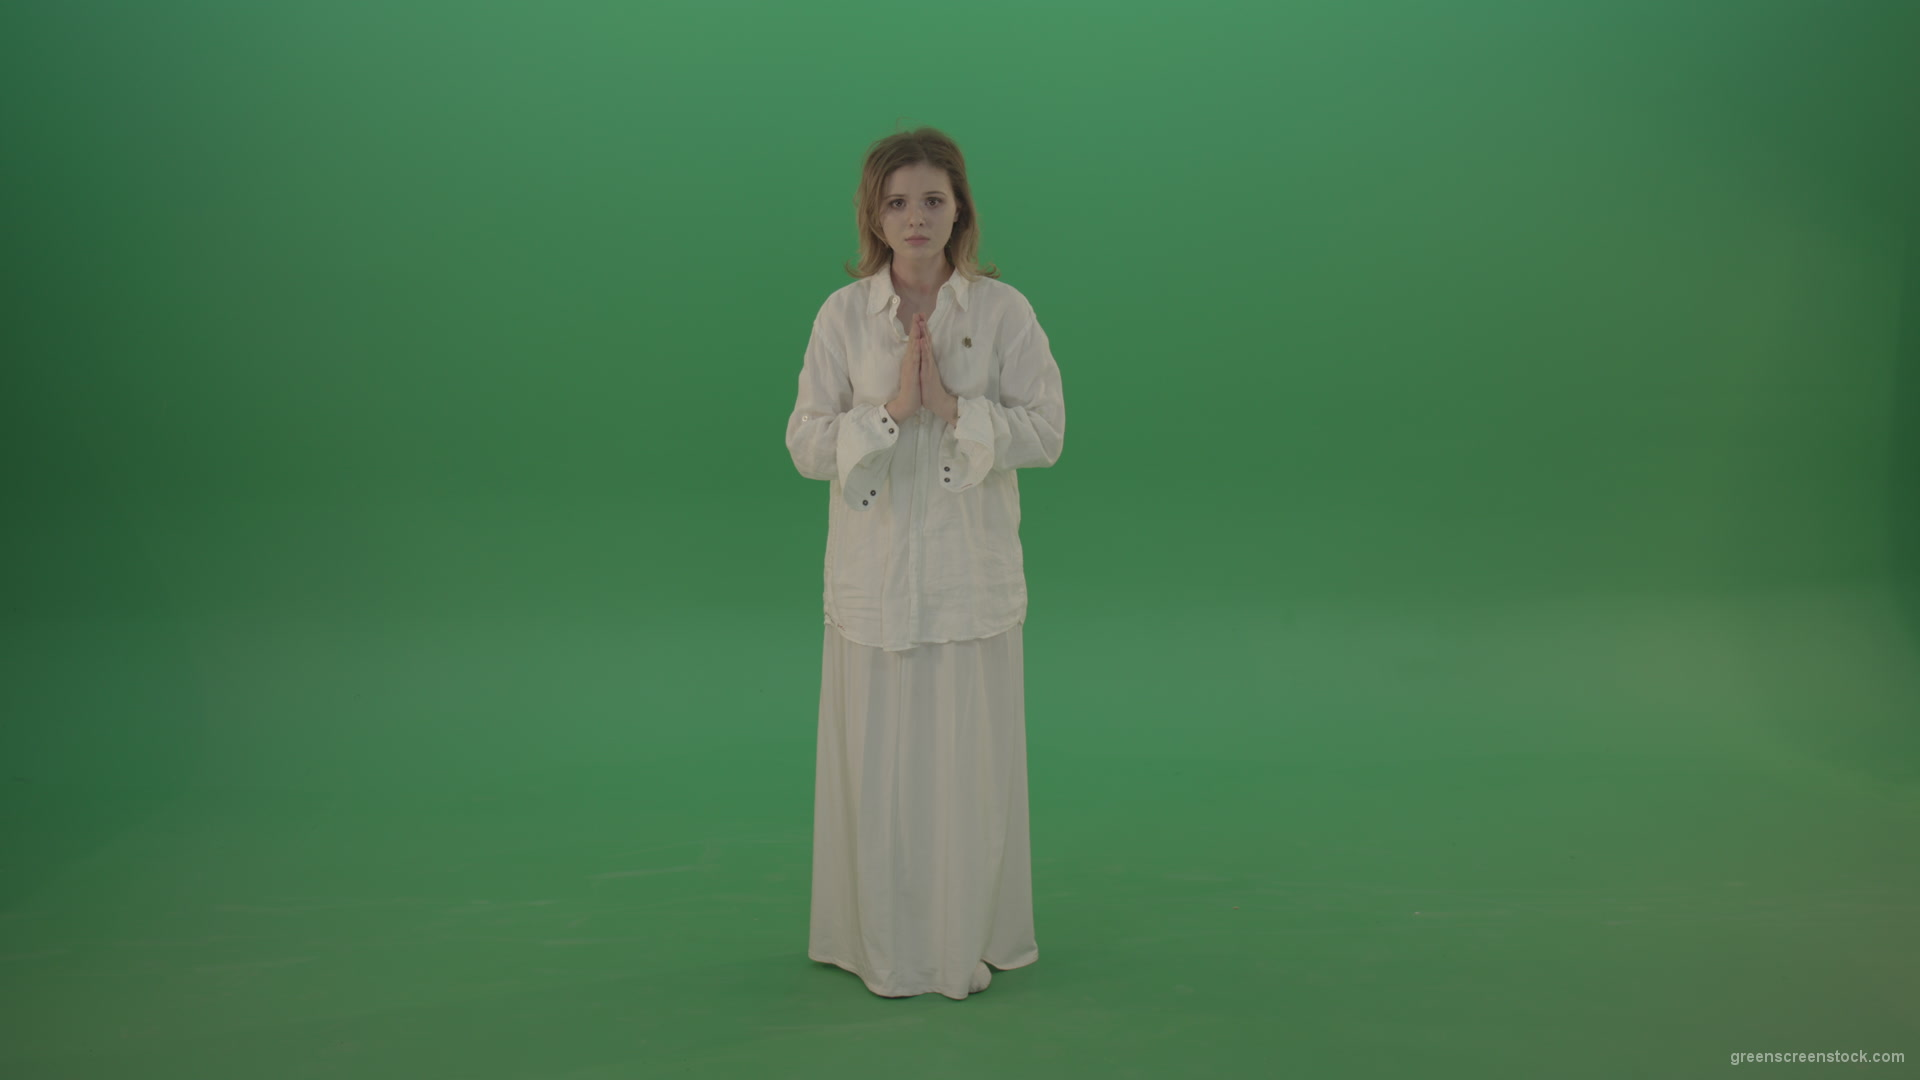 Girl-wearing-a-white-suit-pray-to-god-isolated-on-green-background_004 Green Screen Stock